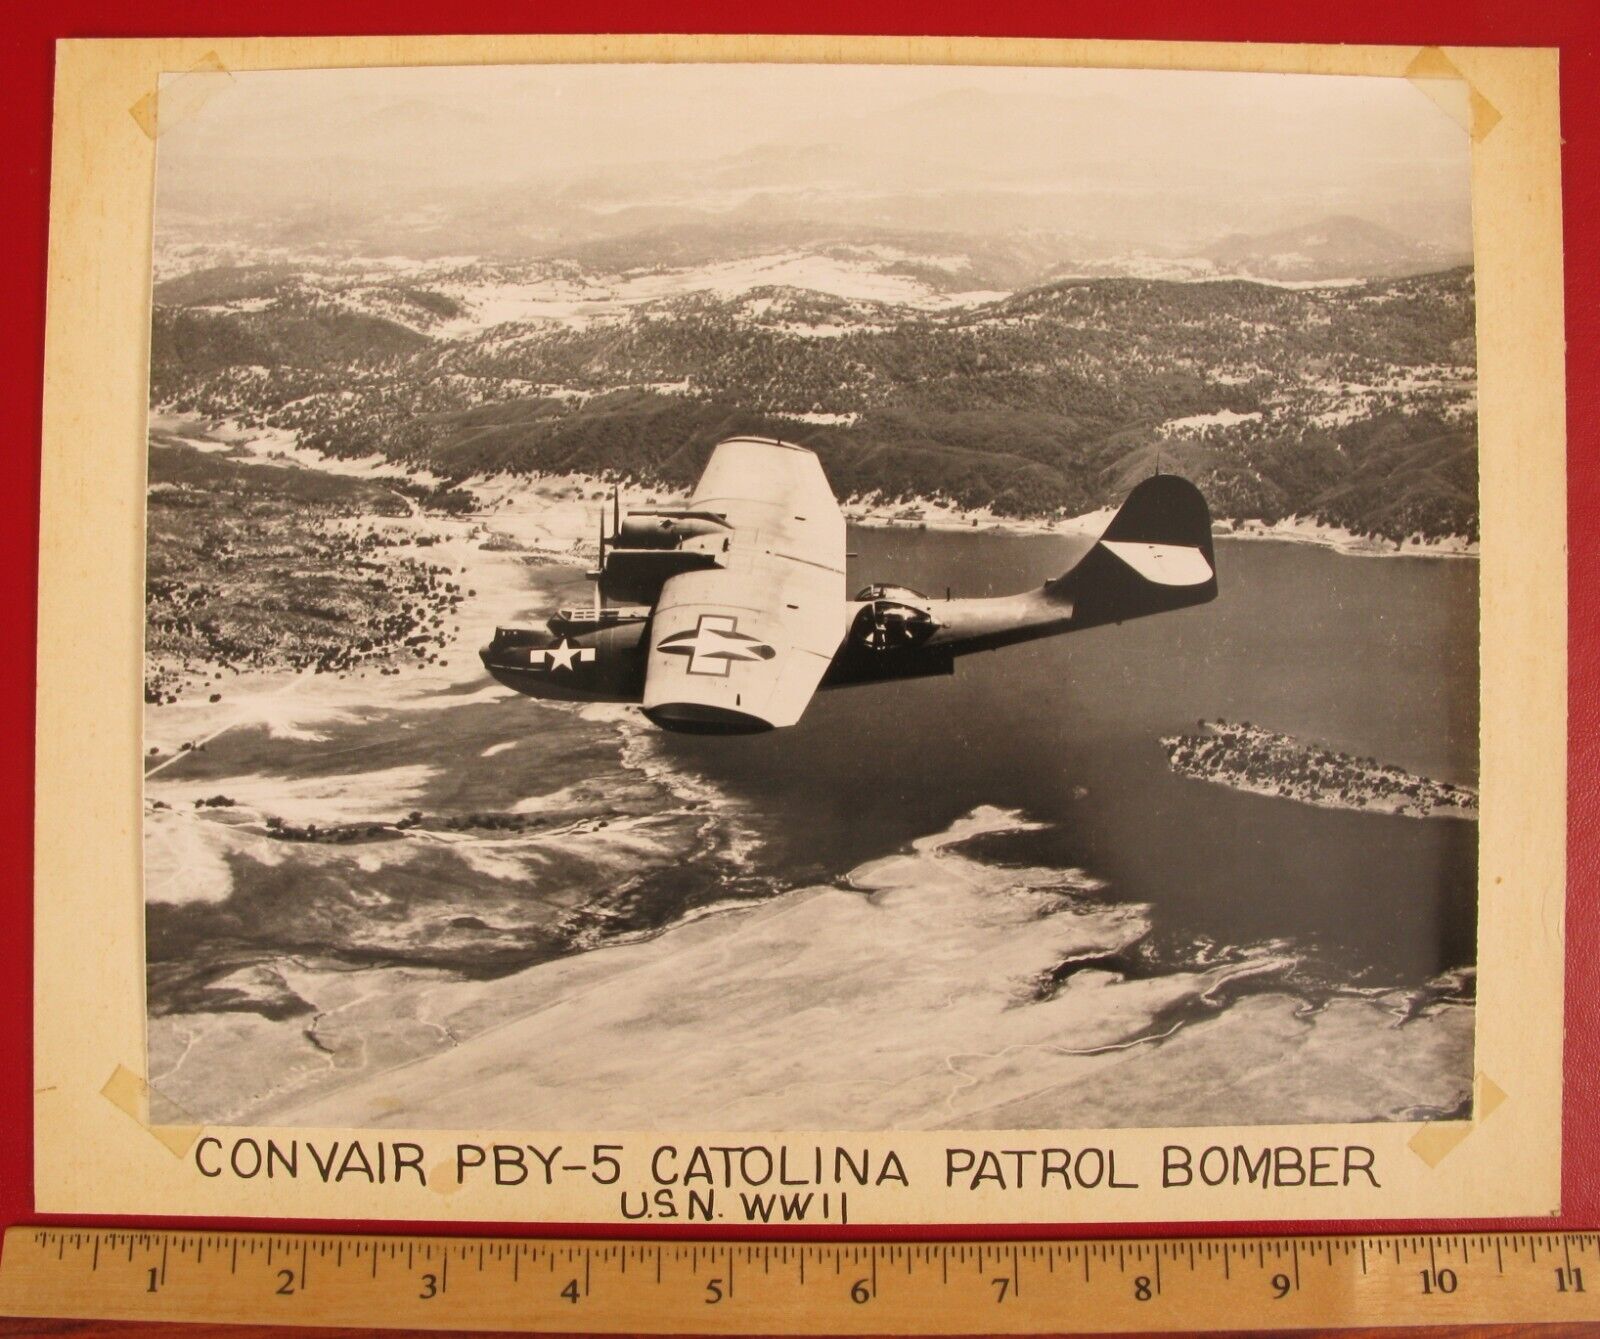 VINTAGE PHOTOGRAPH CONVAIR PBY-5 CATOLINA BOMBER USN WWII MILITARY NAVY AIRPLANE